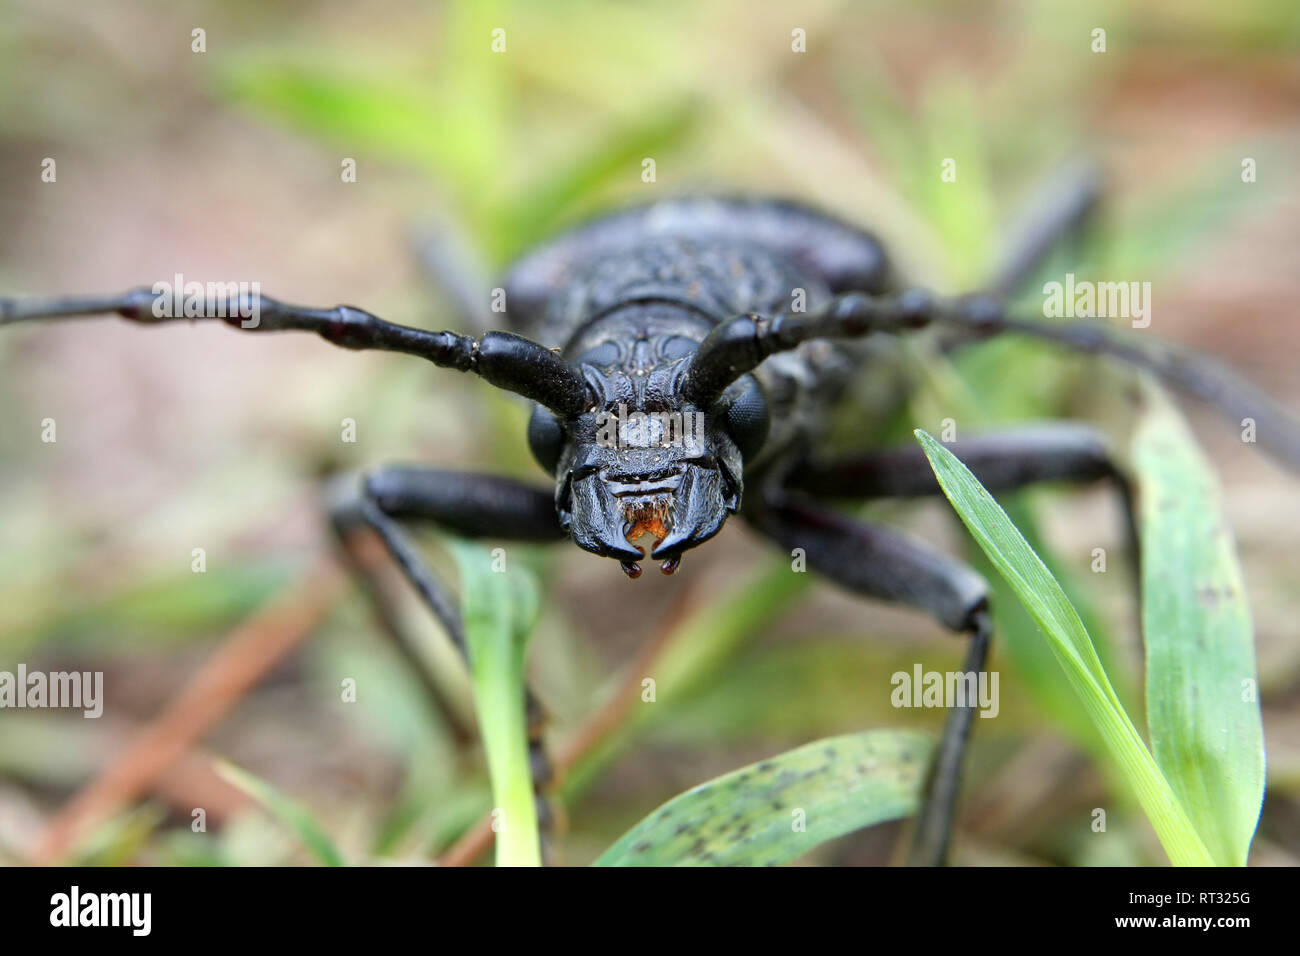 black bug found in grass in Croatia. It is about 6 cm long Stock Photo